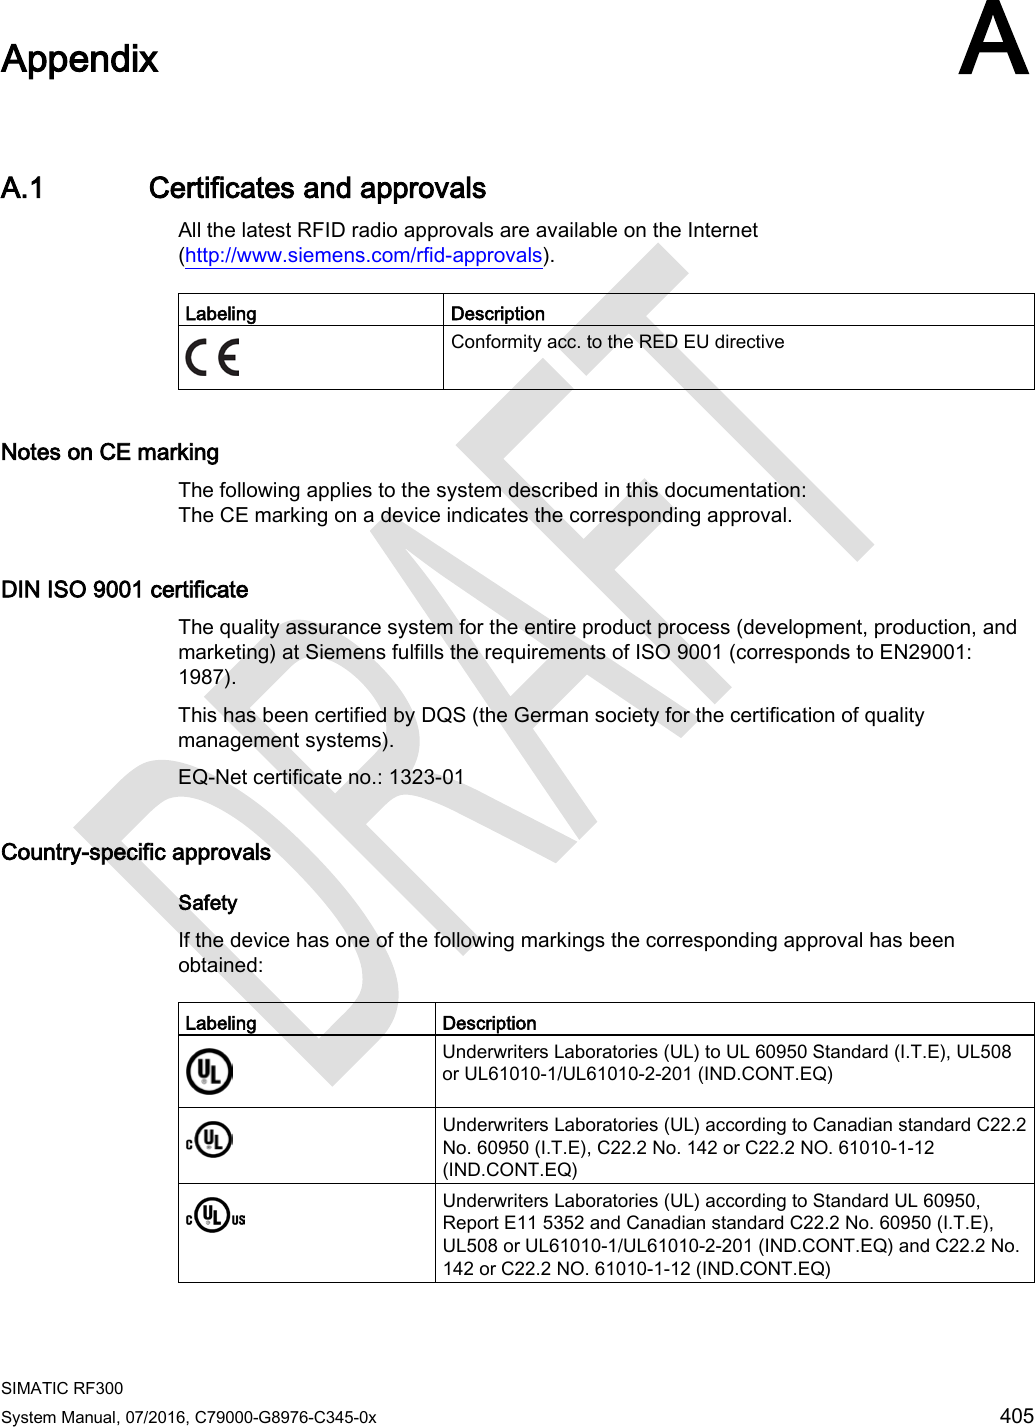  SIMATIC RF300 System Manual, 07/2016, C79000-G8976-C345-0x 405  Appendix A A.1 Certificates and approvals All the latest RFID radio approvals are available on the Internet (http://www.siemens.com/rfid-approvals).  Labeling Description  Conformity acc. to the RED EU directive Notes on CE marking The following applies to the system described in this documentation:  The CE marking on a device indicates the corresponding approval. DIN ISO 9001 certificate  The quality assurance system for the entire product process (development, production, and marketing) at Siemens fulfills the requirements of ISO 9001 (corresponds to EN29001: 1987). This has been certified by DQS (the German society for the certification of quality management systems). EQ-Net certificate no.: 1323-01 Country-specific approvals Safety If the device has one of the following markings the corresponding approval has been obtained:  Labeling Description  Underwriters Laboratories (UL) to UL 60950 Standard (I.T.E), UL508 or UL61010-1/UL61010-2-201 (IND.CONT.EQ)  Underwriters Laboratories (UL) according to Canadian standard C22.2 No. 60950 (I.T.E), C22.2 No. 142 or C22.2 NO. 61010-1-12 (IND.CONT.EQ)  Underwriters Laboratories (UL) according to Standard UL 60950, Report E11 5352 and Canadian standard C22.2 No. 60950 (I.T.E), UL508 or UL61010-1/UL61010-2-201 (IND.CONT.EQ) and C22.2 No. 142 or C22.2 NO. 61010-1-12 (IND.CONT.EQ) 